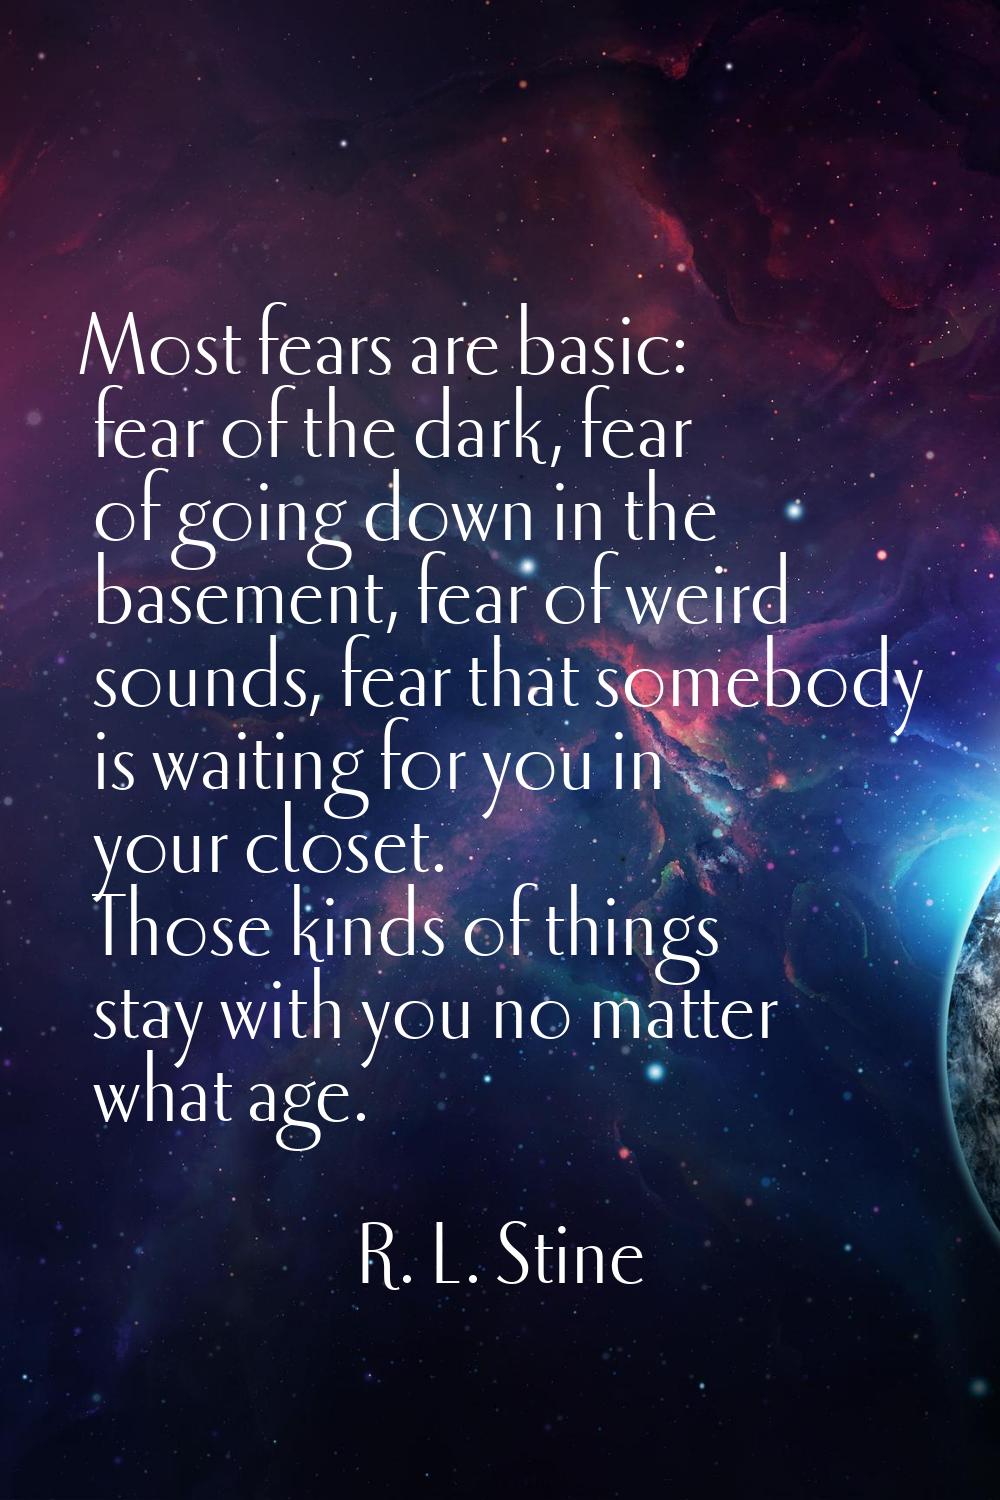 Most fears are basic: fear of the dark, fear of going down in the basement, fear of weird sounds, f